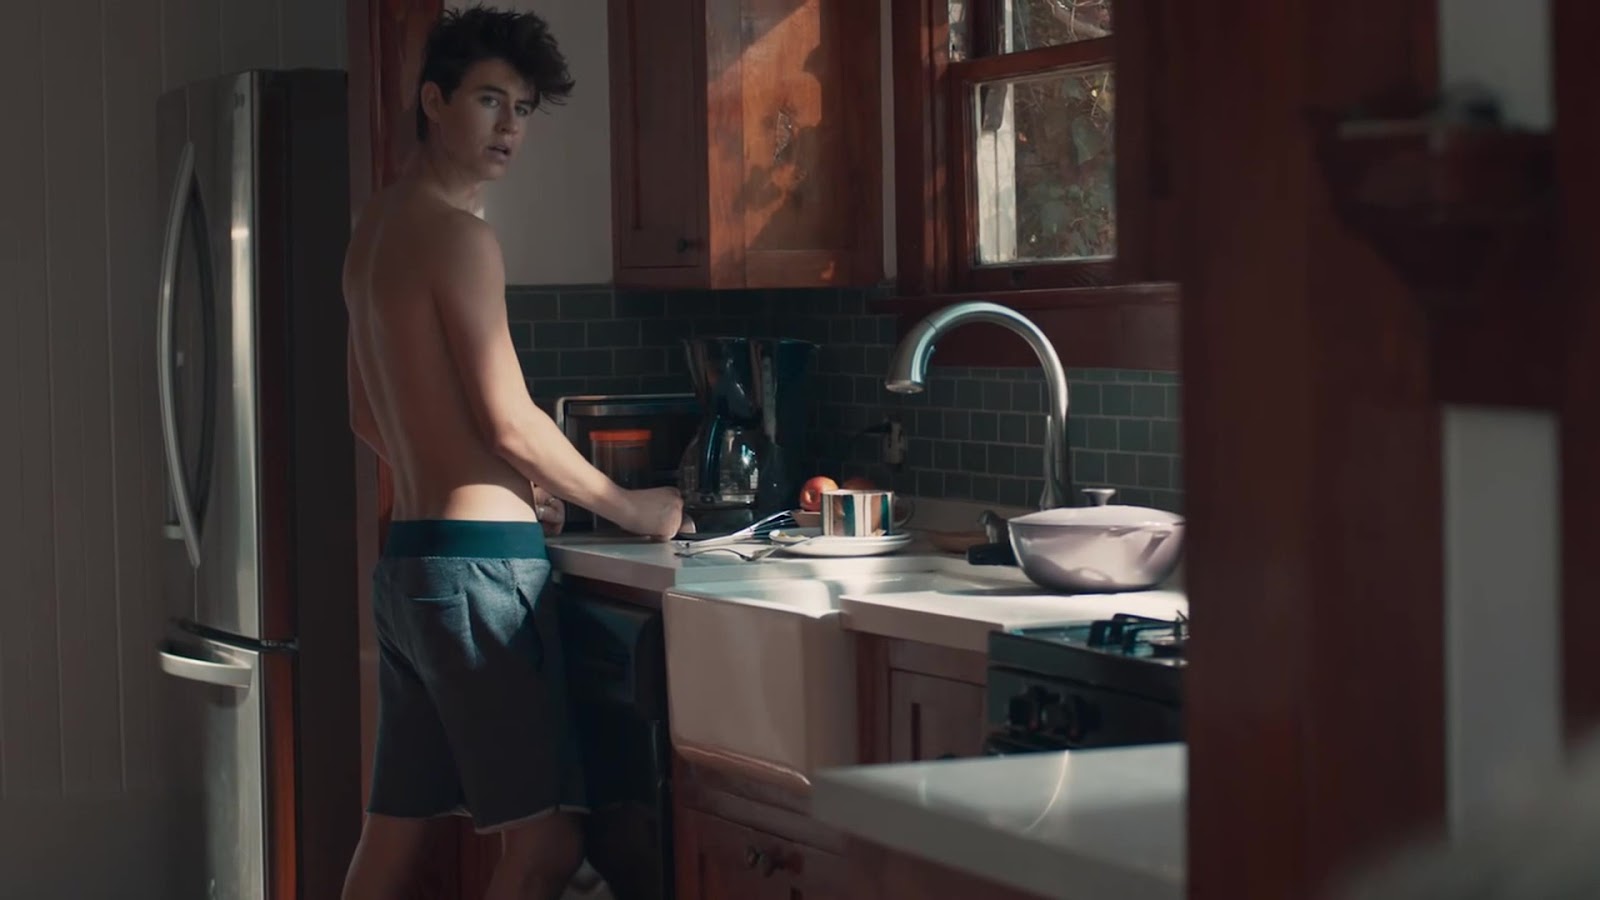 Nash Grier shirtless in The Deleted 1-03 "The Hook Up" .